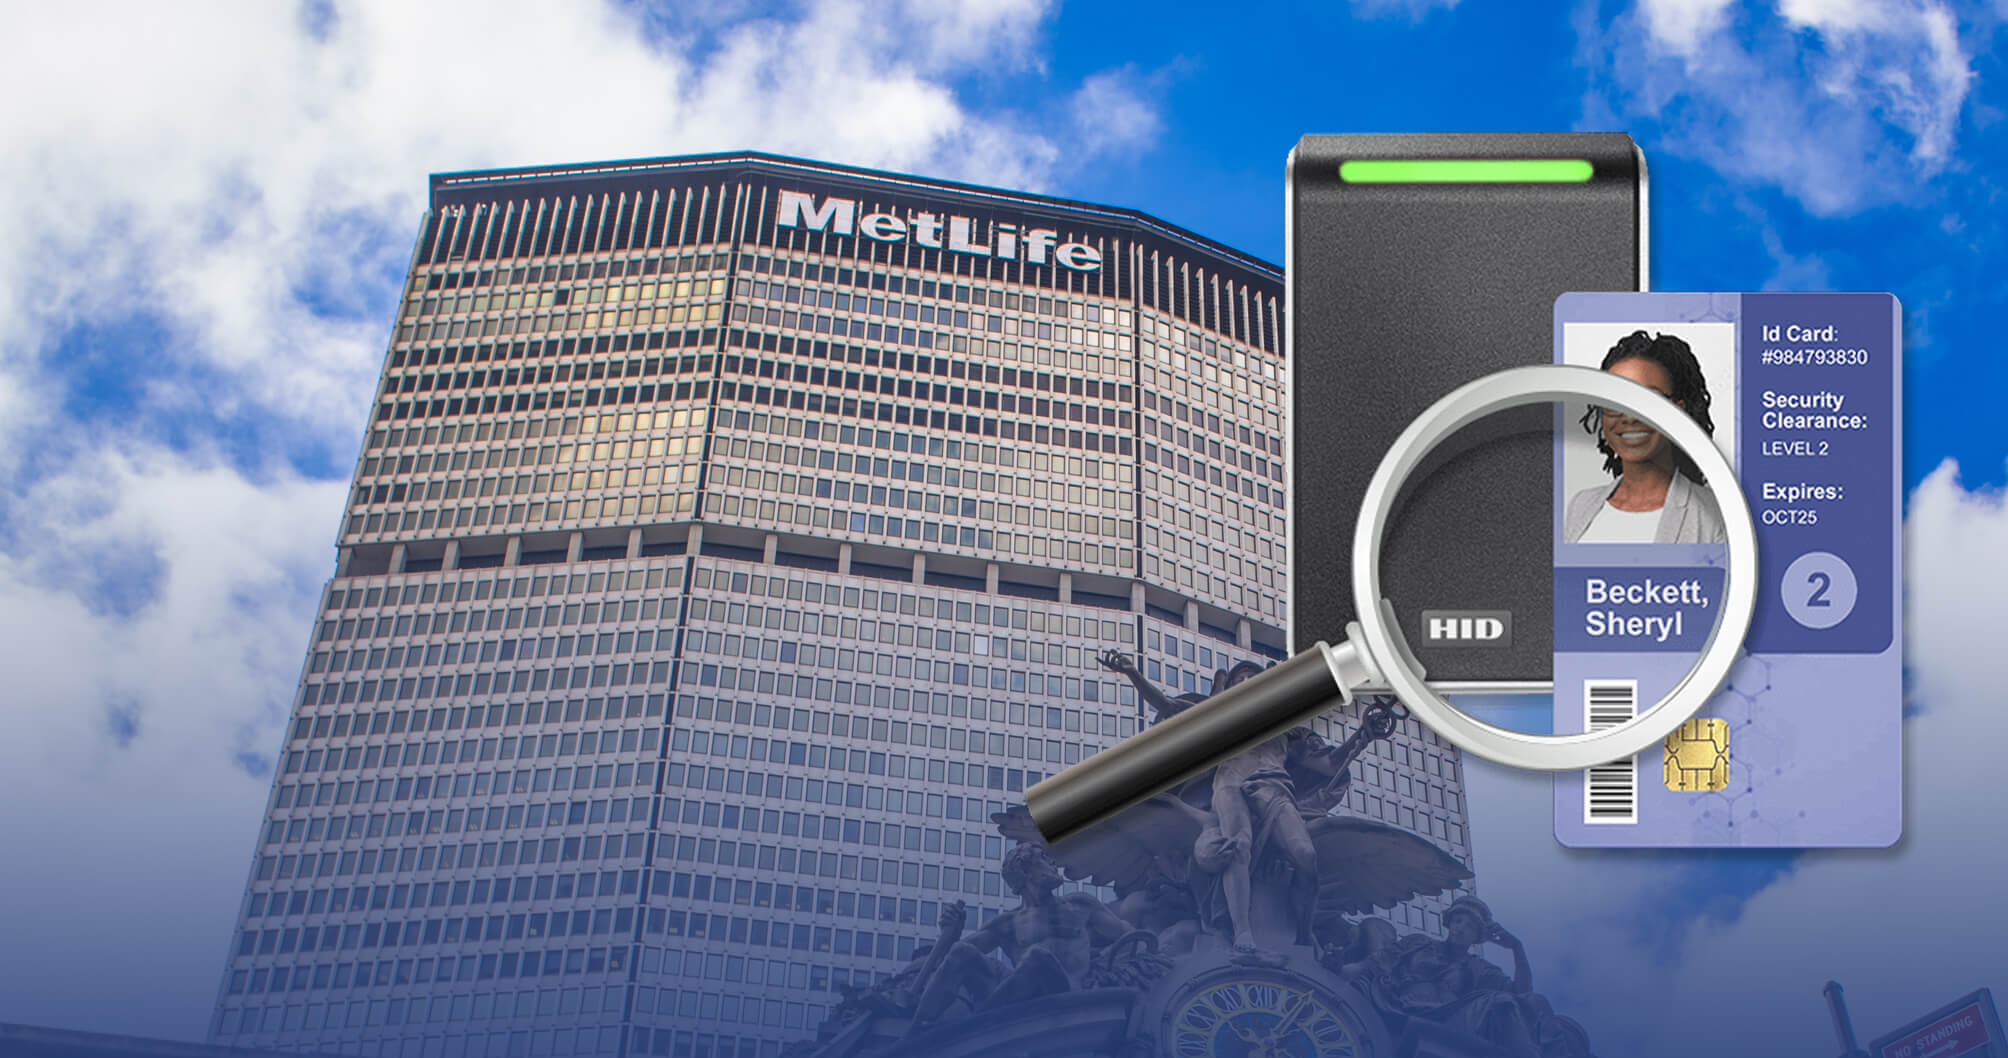 Physical Access Control System Analysis for MetLife Building